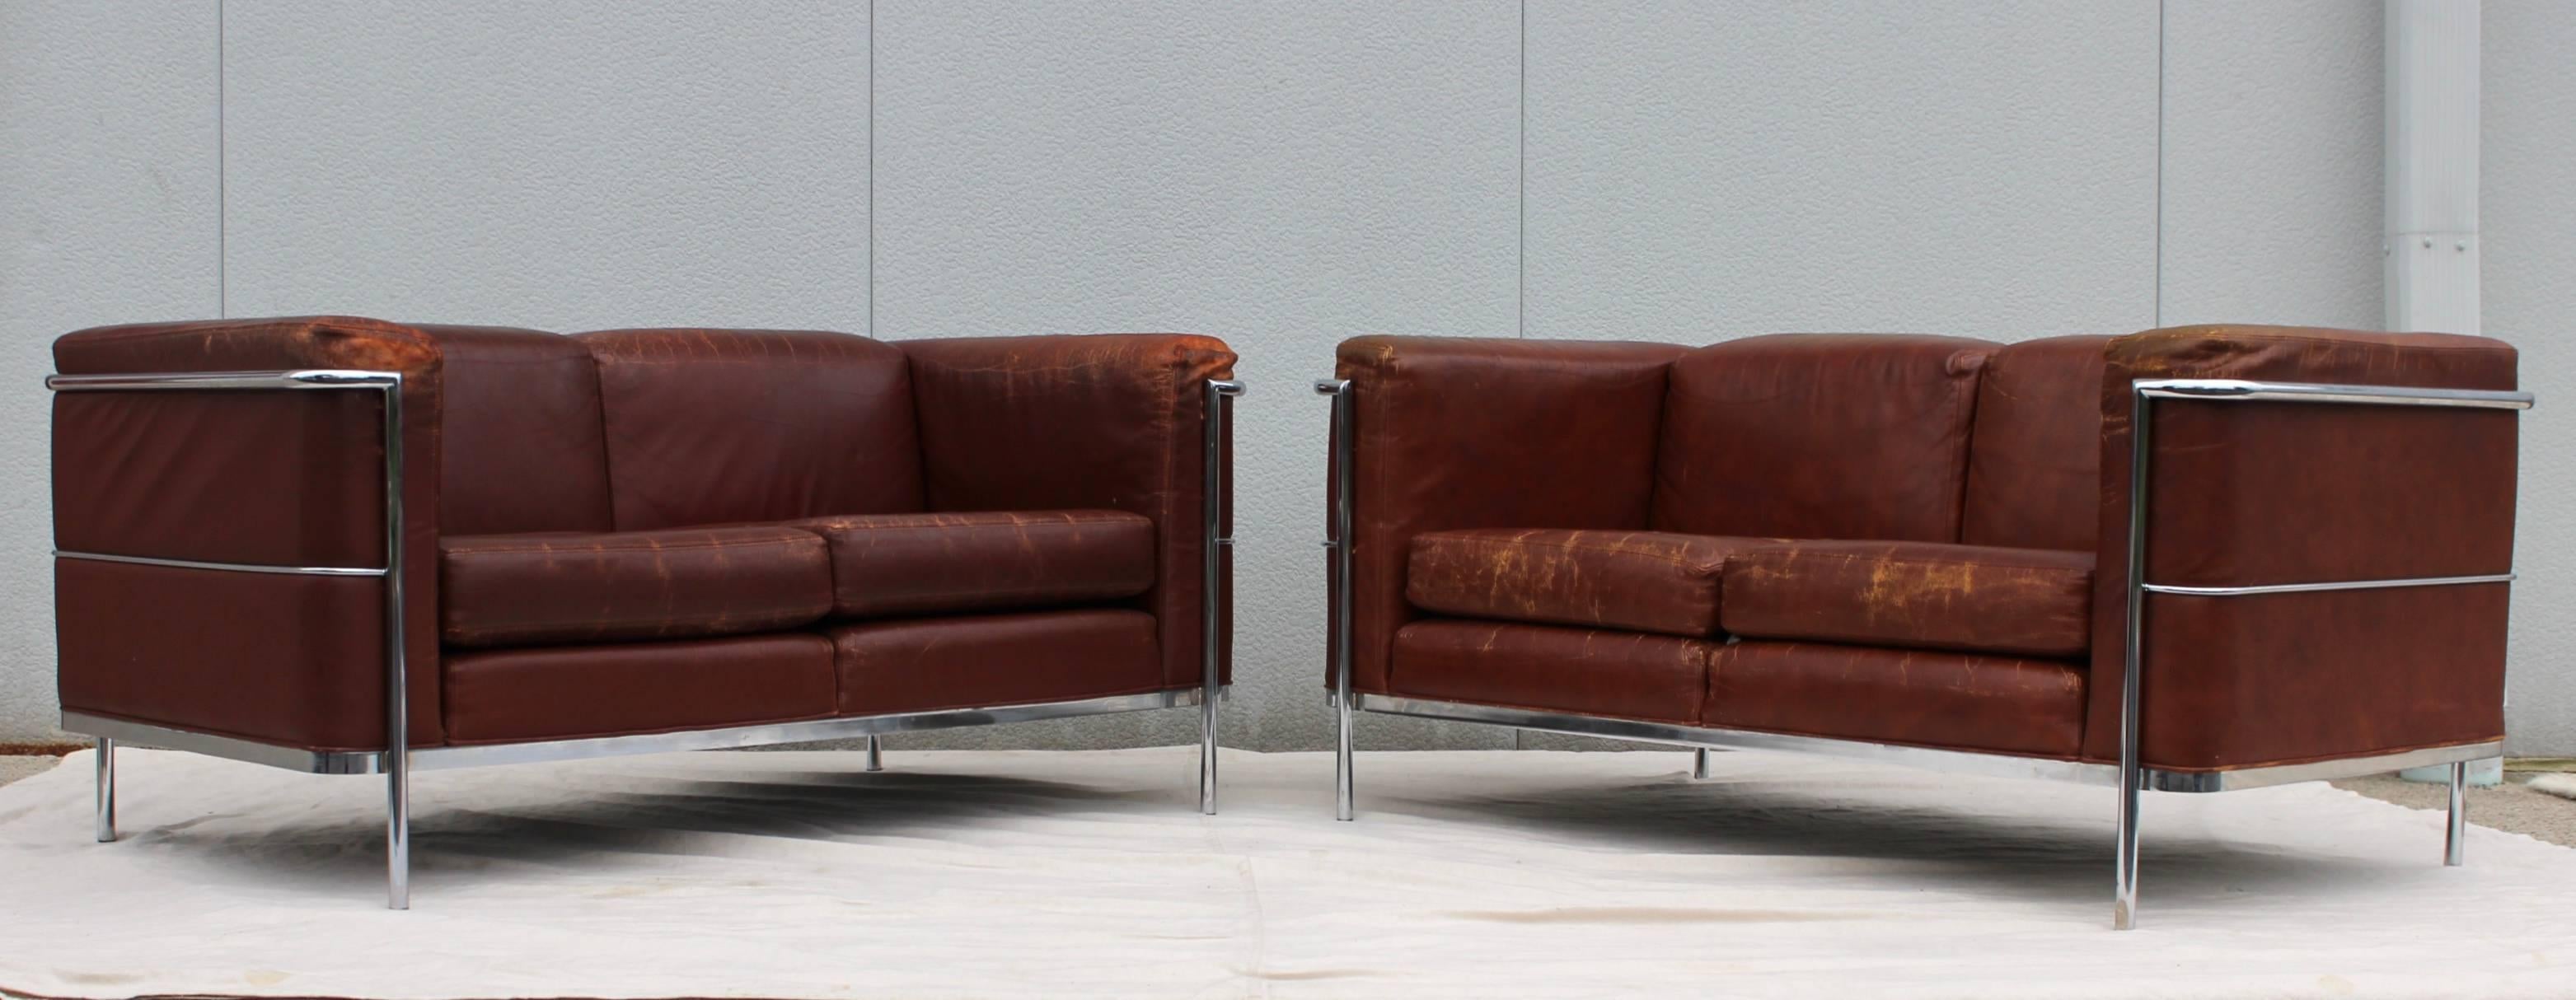 Stunning pair of 1980s distressed leather with chrome frame loveseats by Jack Cartwright. 

Matching pair of chairs and sofa is also available.